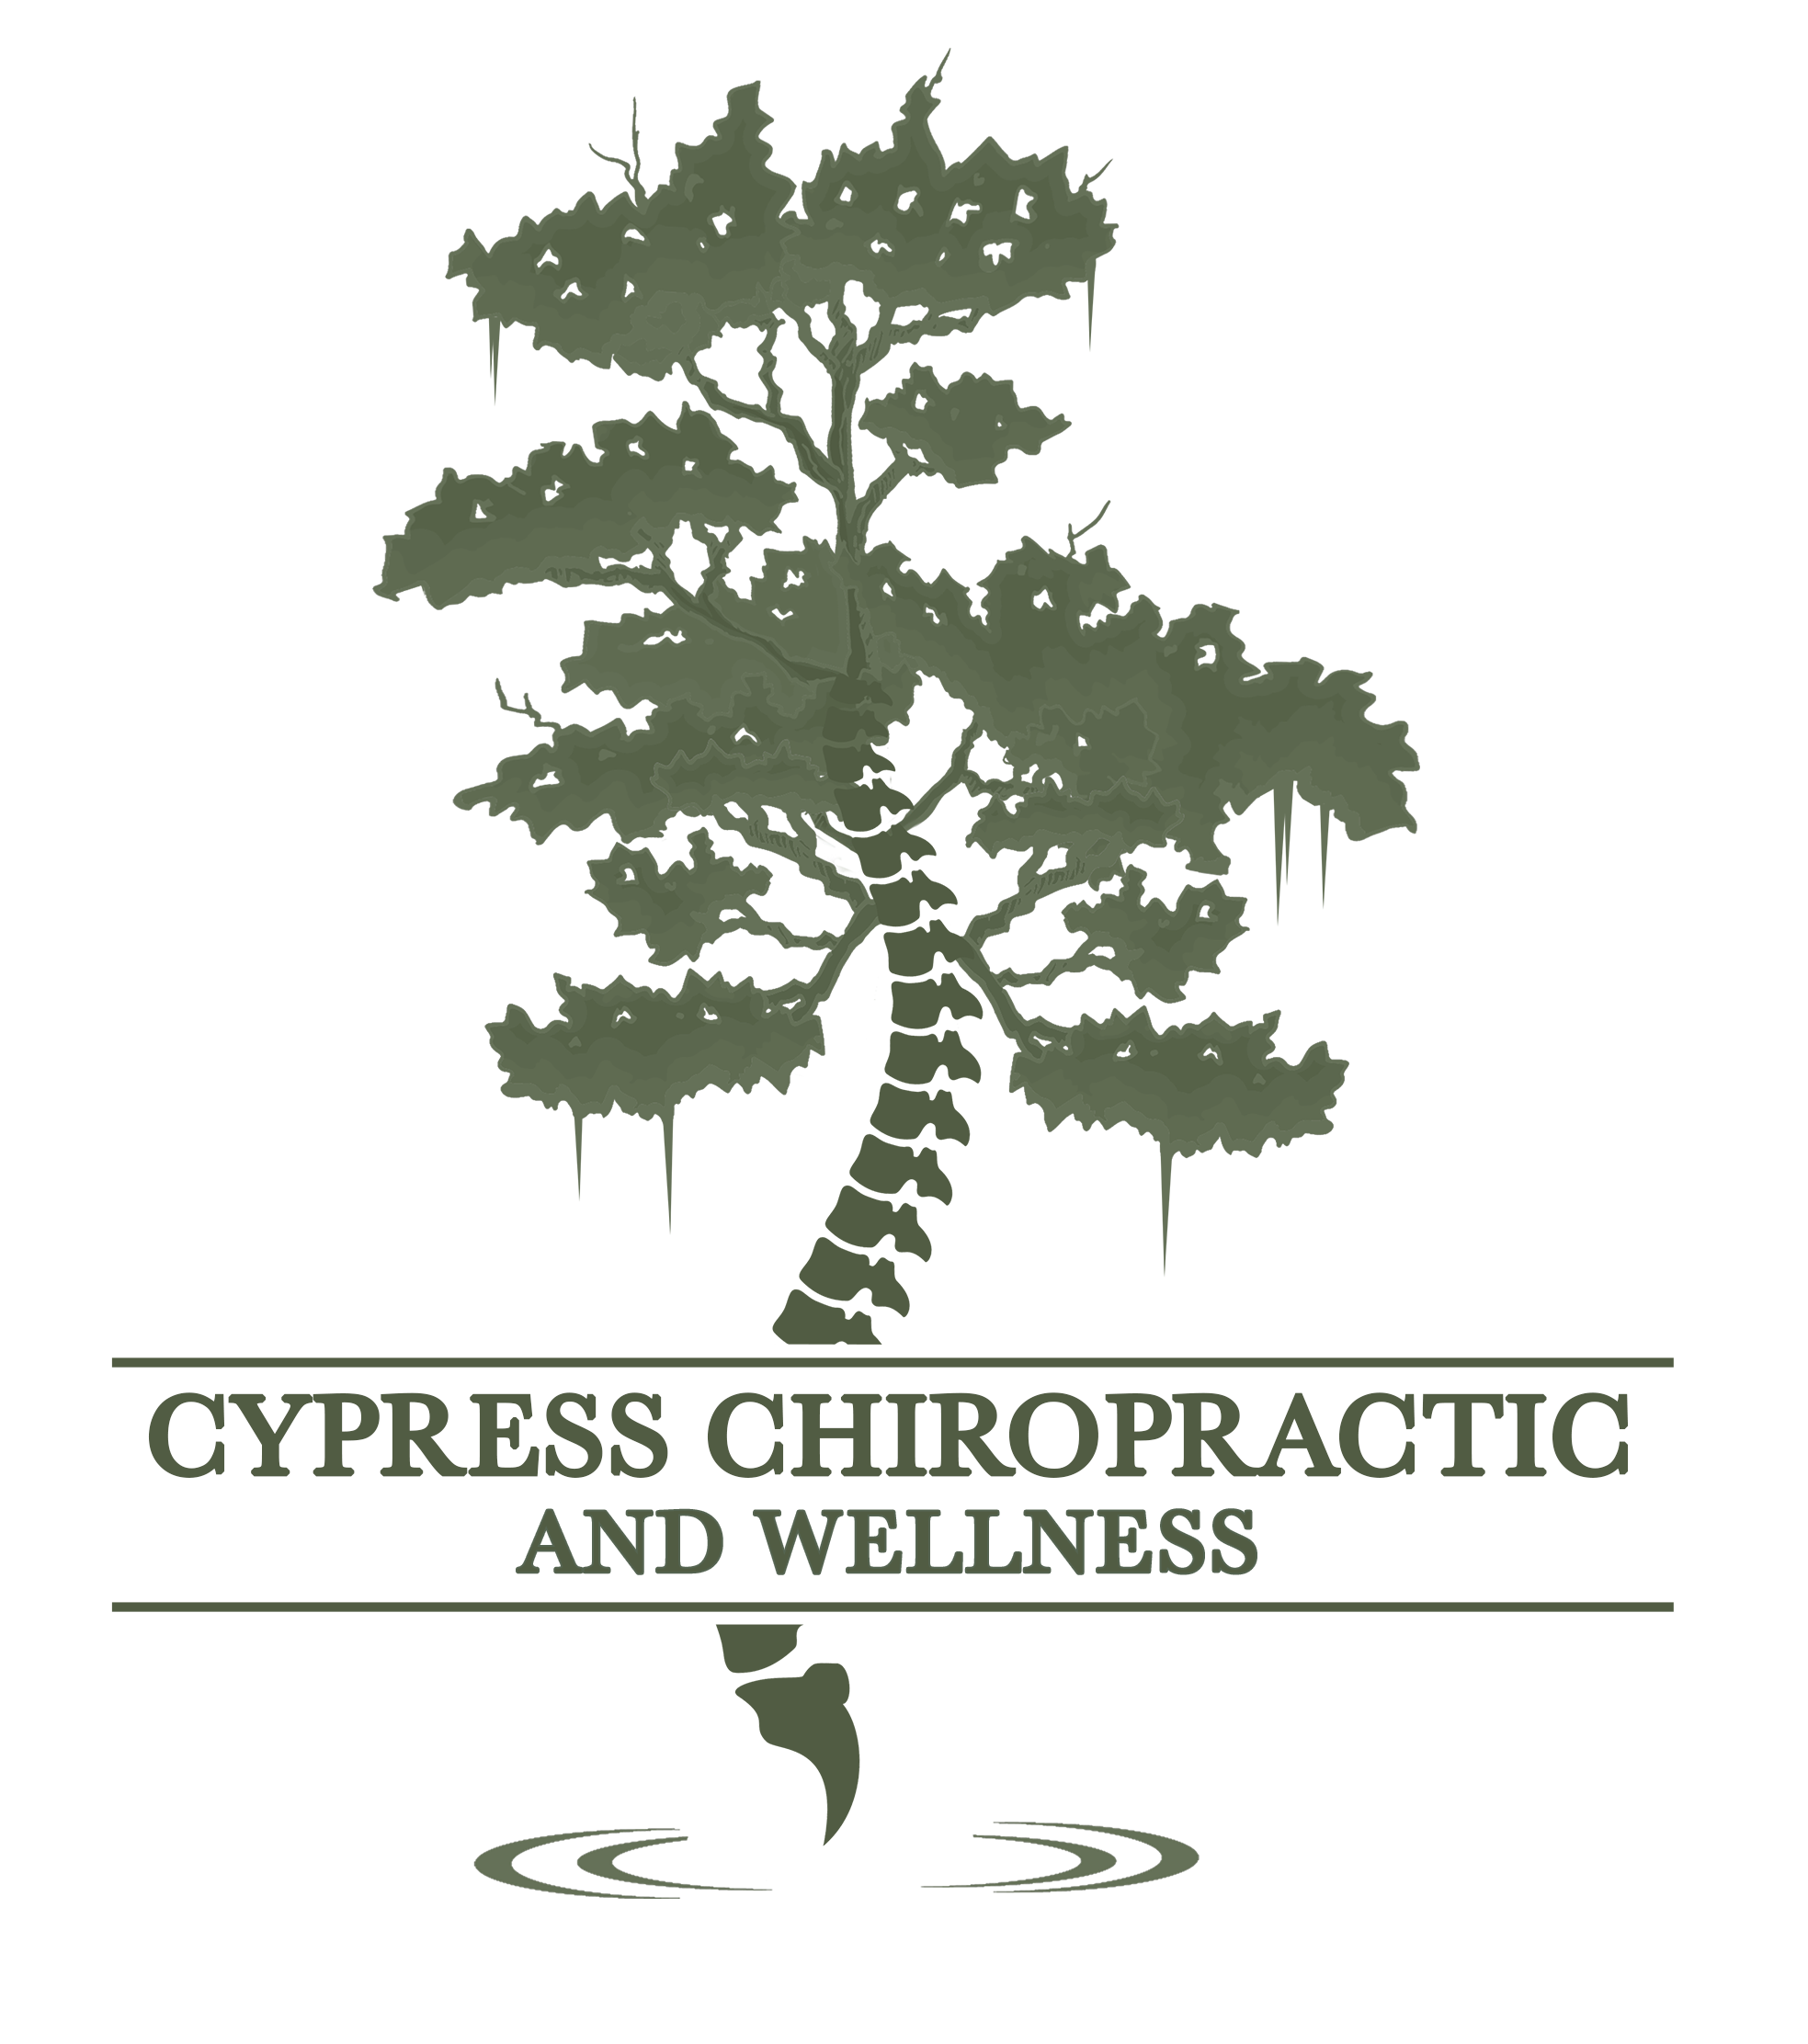 Cypress Chiropractic and Wellness